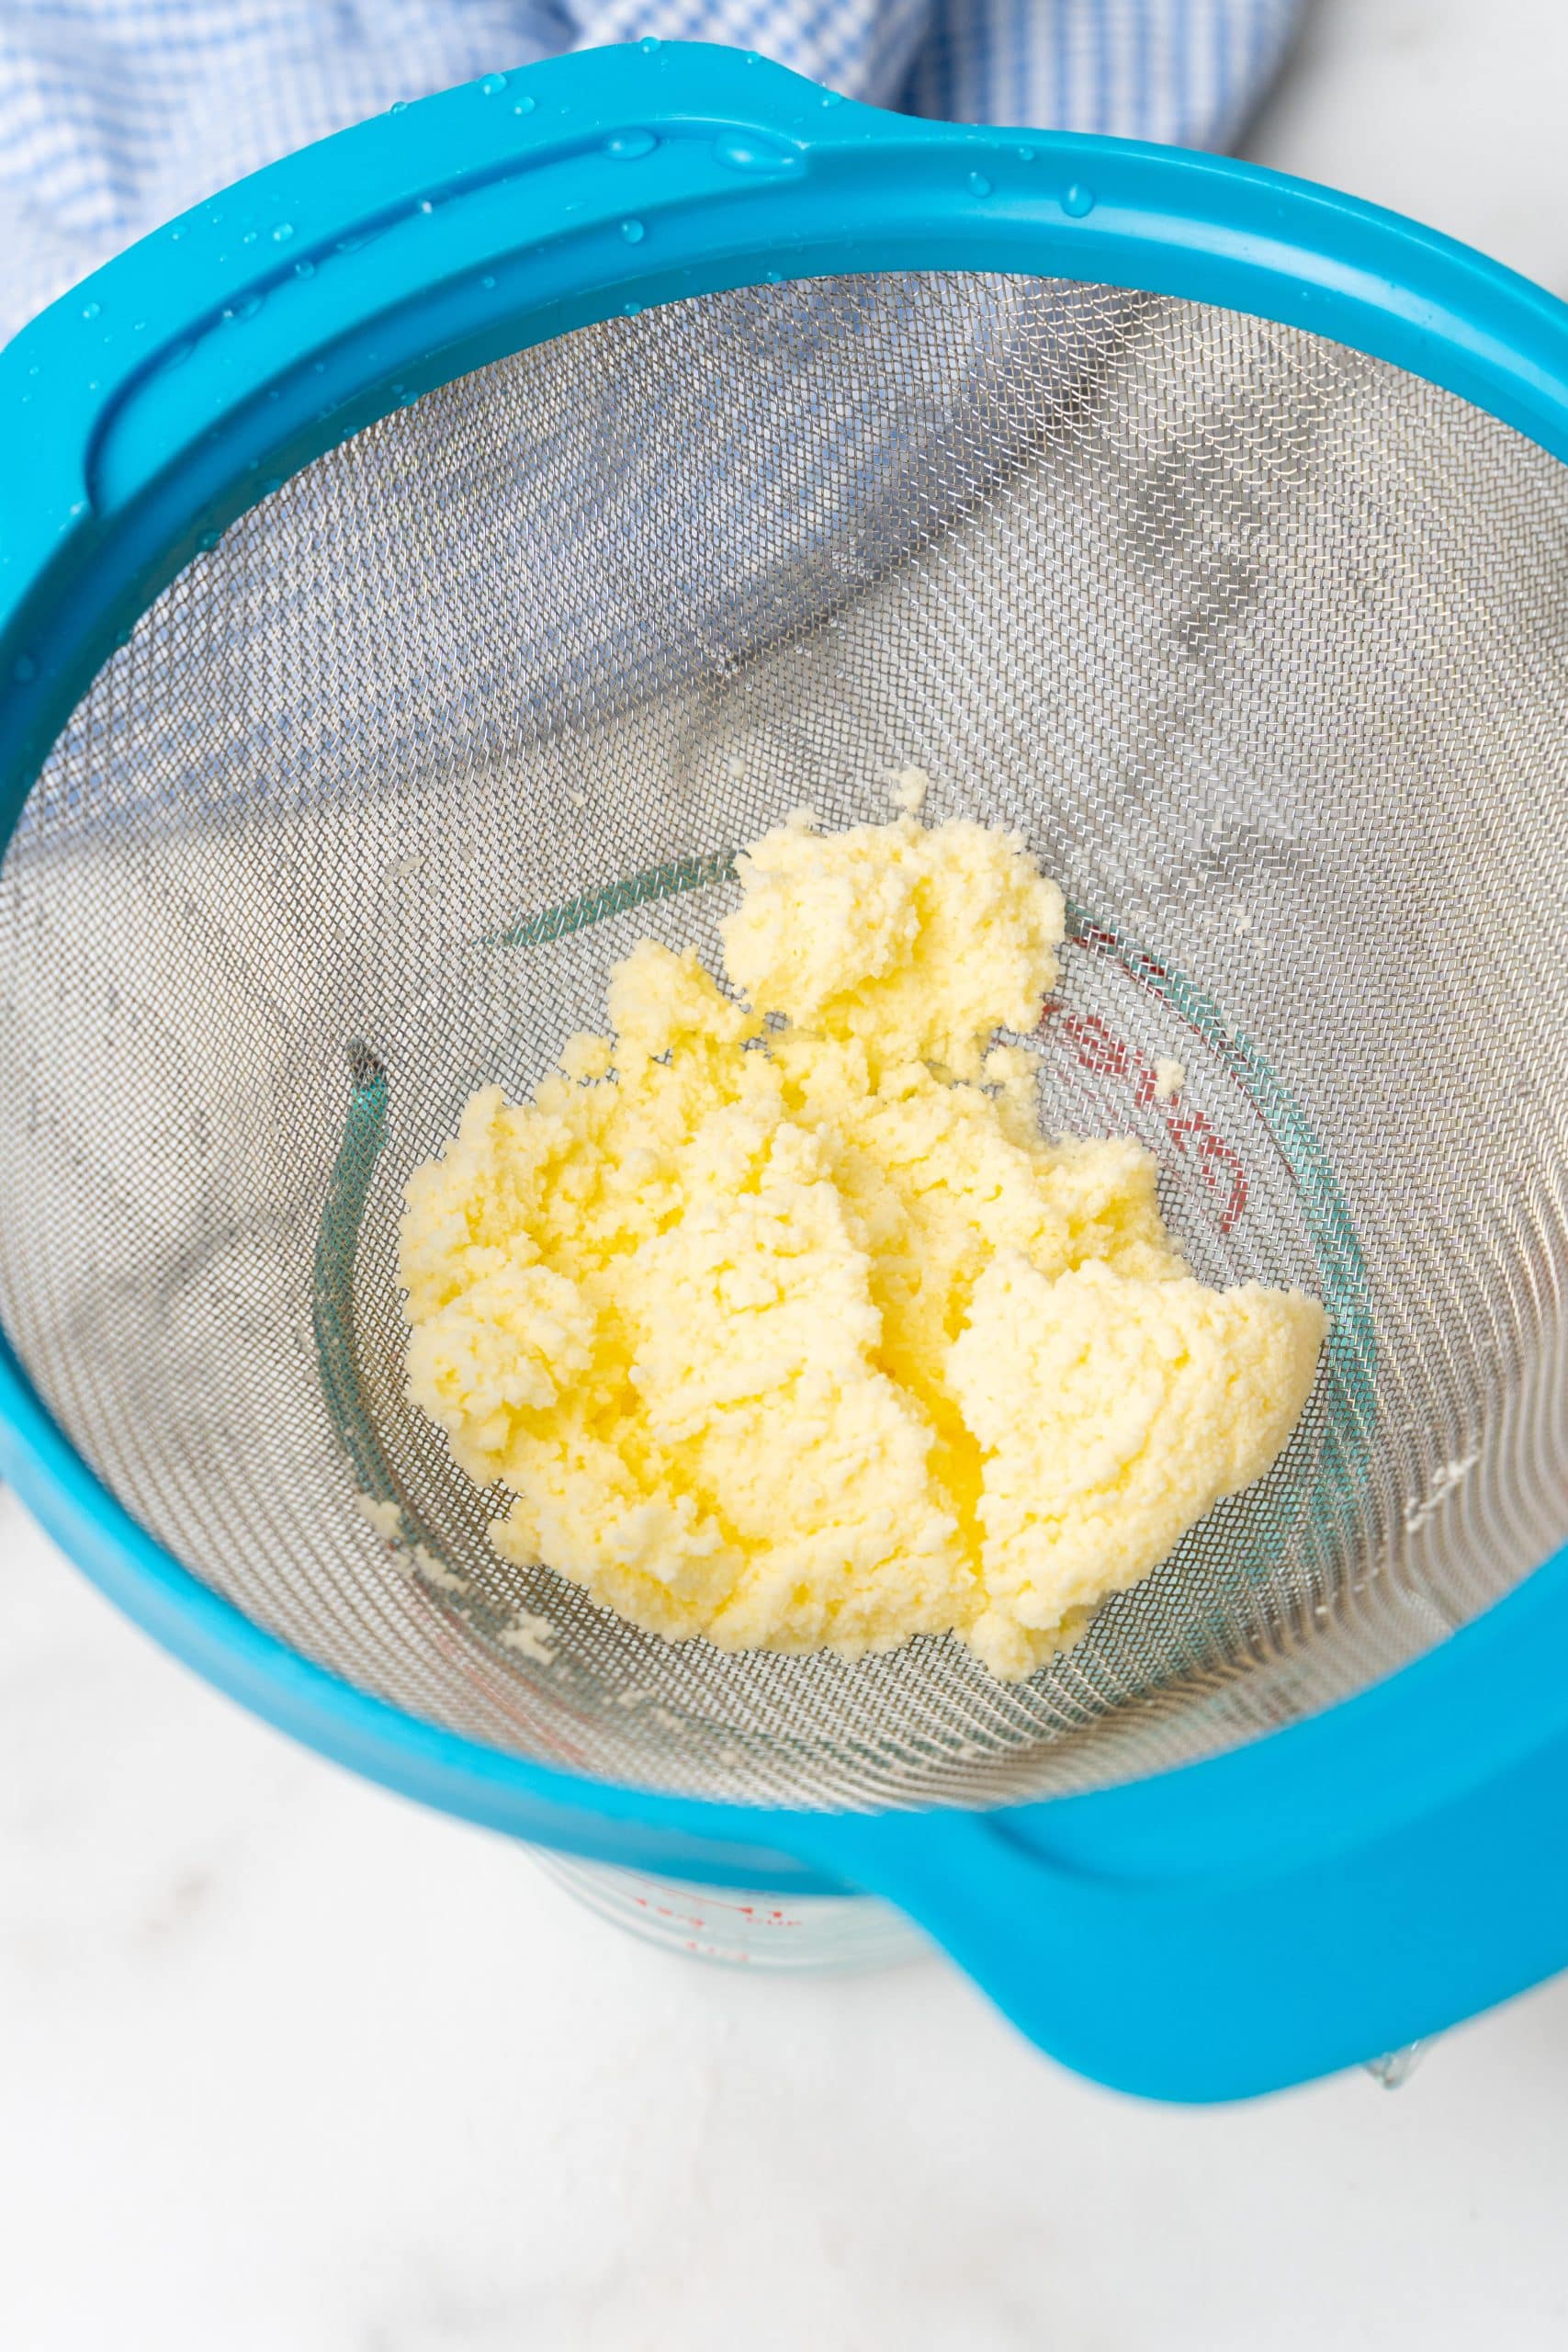 homemade butter in a mesh strainer set over a glass bowl